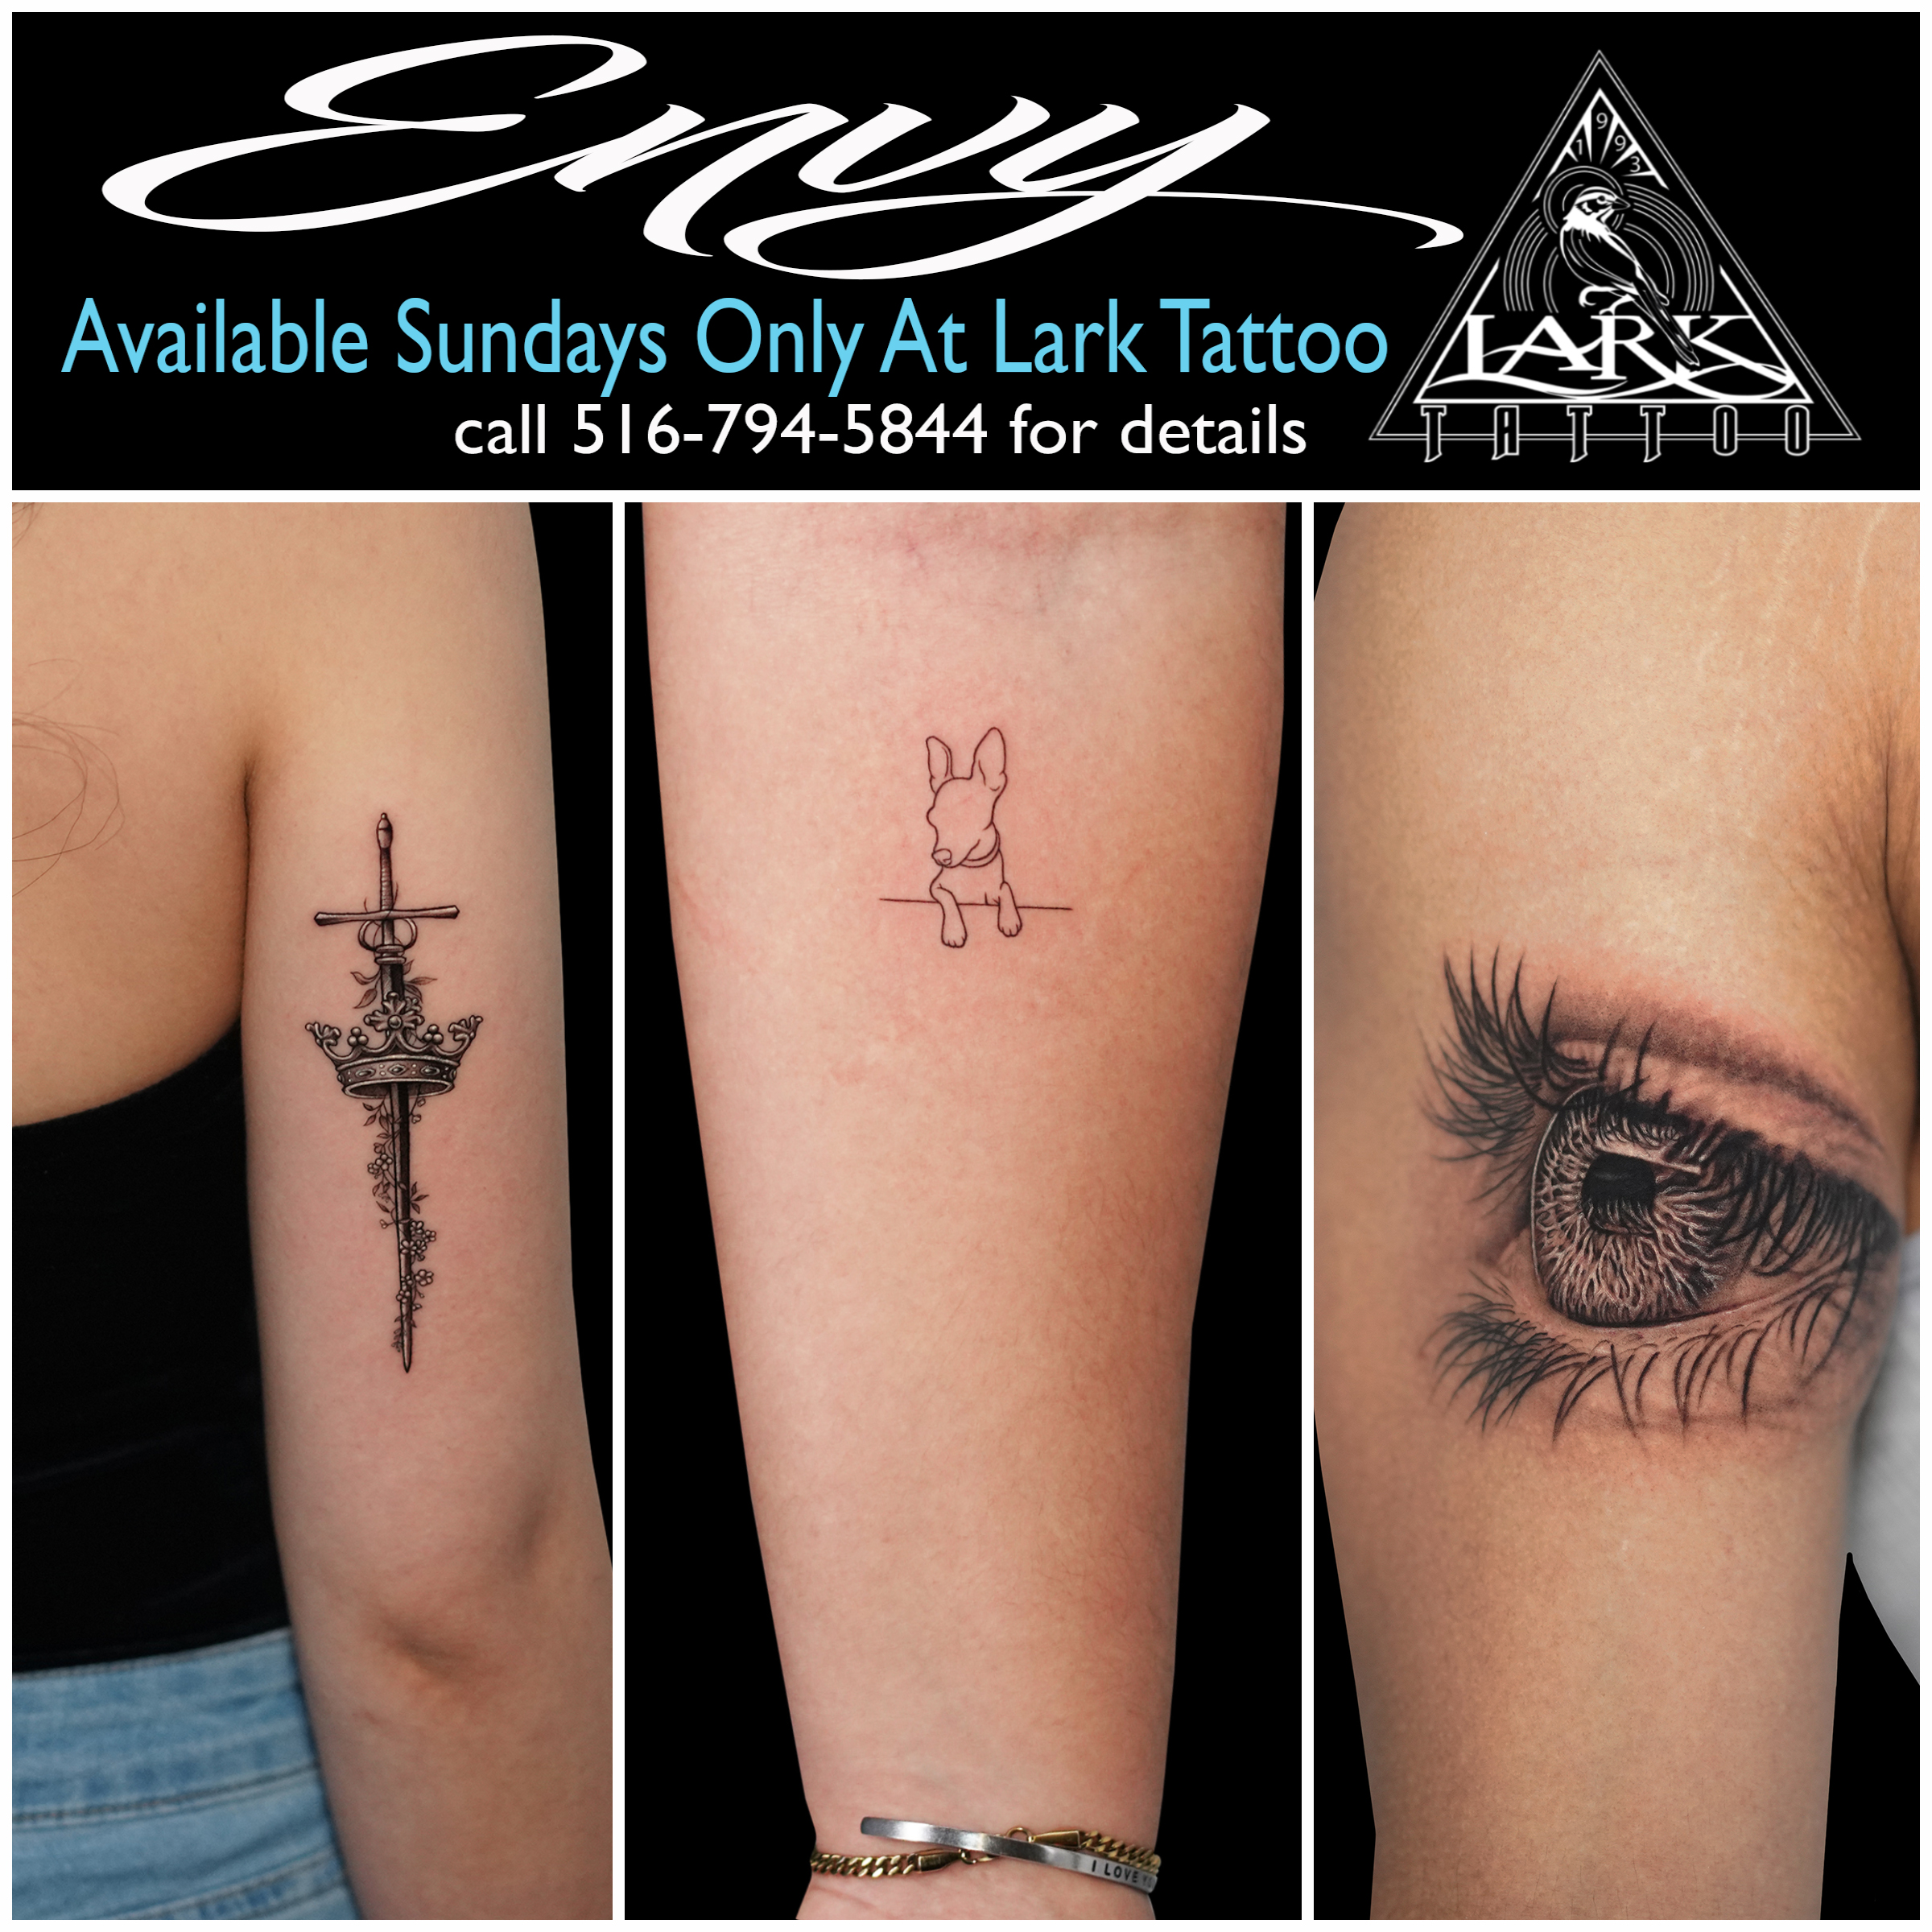 Lark Tattoo proudly welcomes Envy to the Lark Family. - -